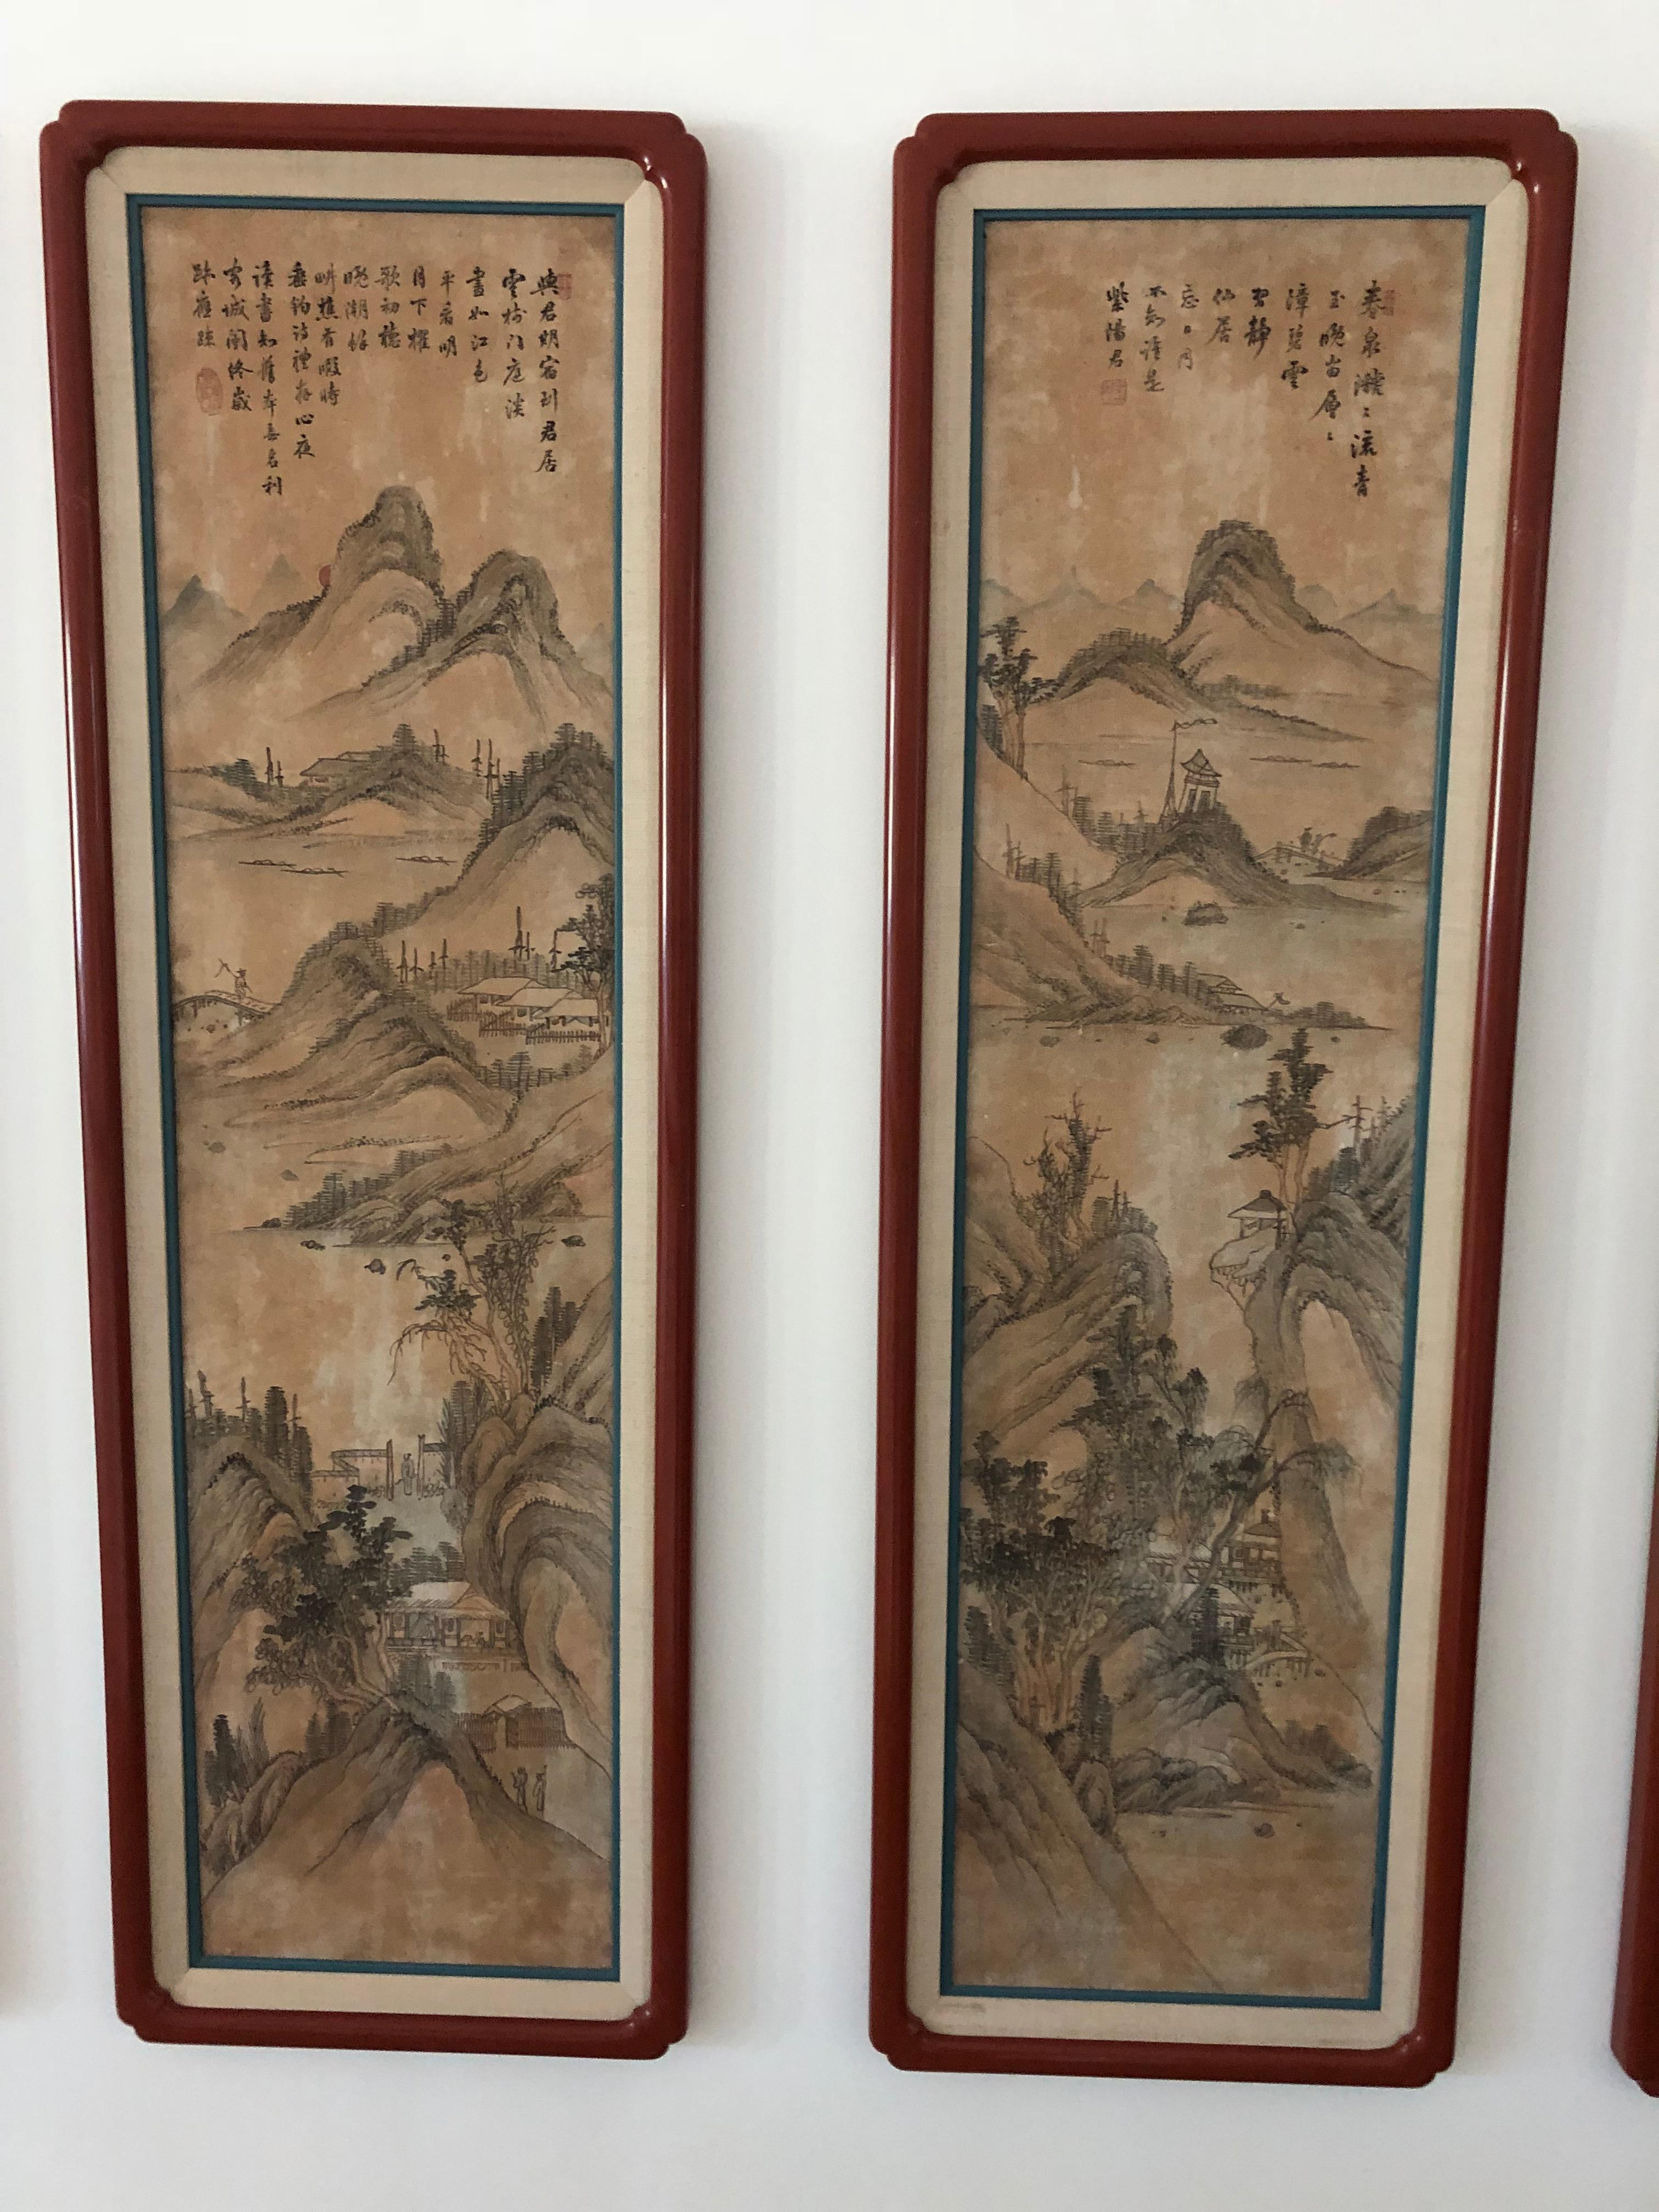 Eight hand painted silk panels of landscapes, mounted in red lacquered and matted. Purchased in London finished antique shop, mid-20th century
poems painted calligraphy.